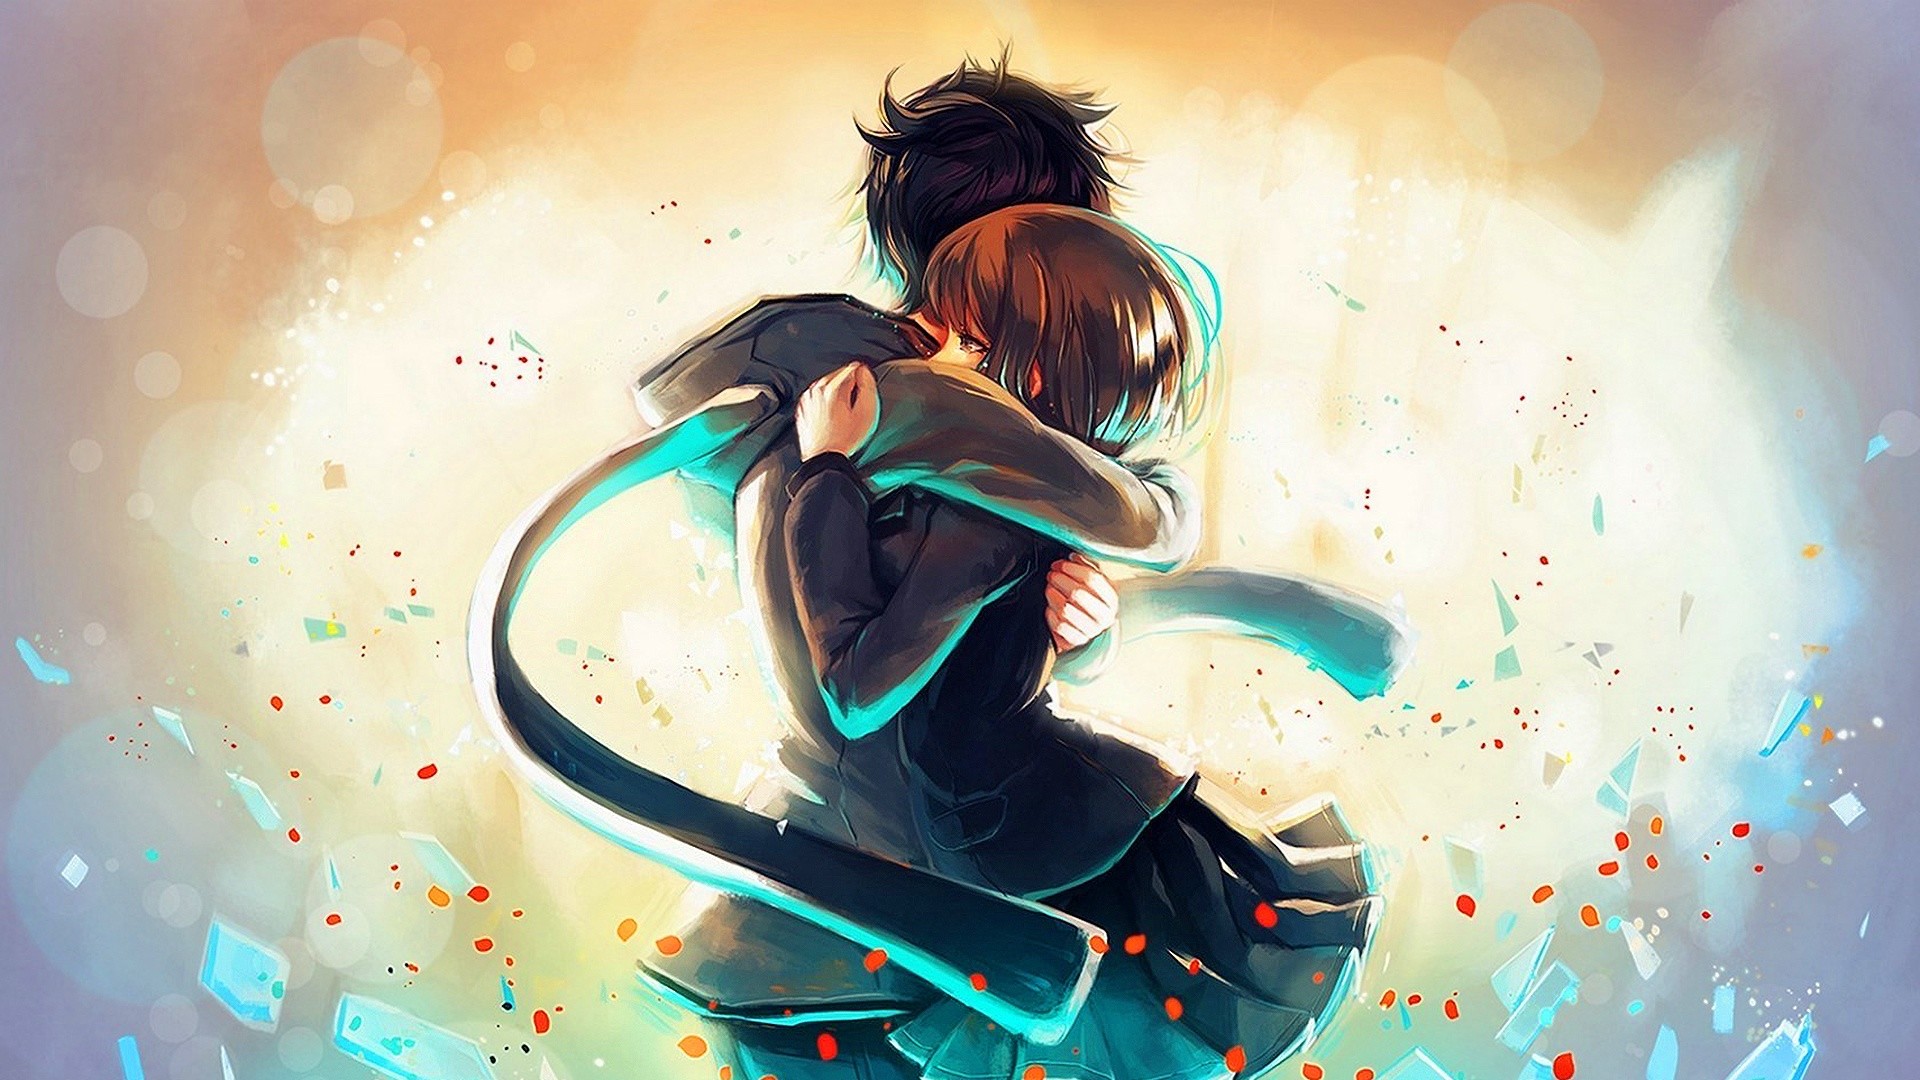 Boy And Girl Wallpapers 70 Images